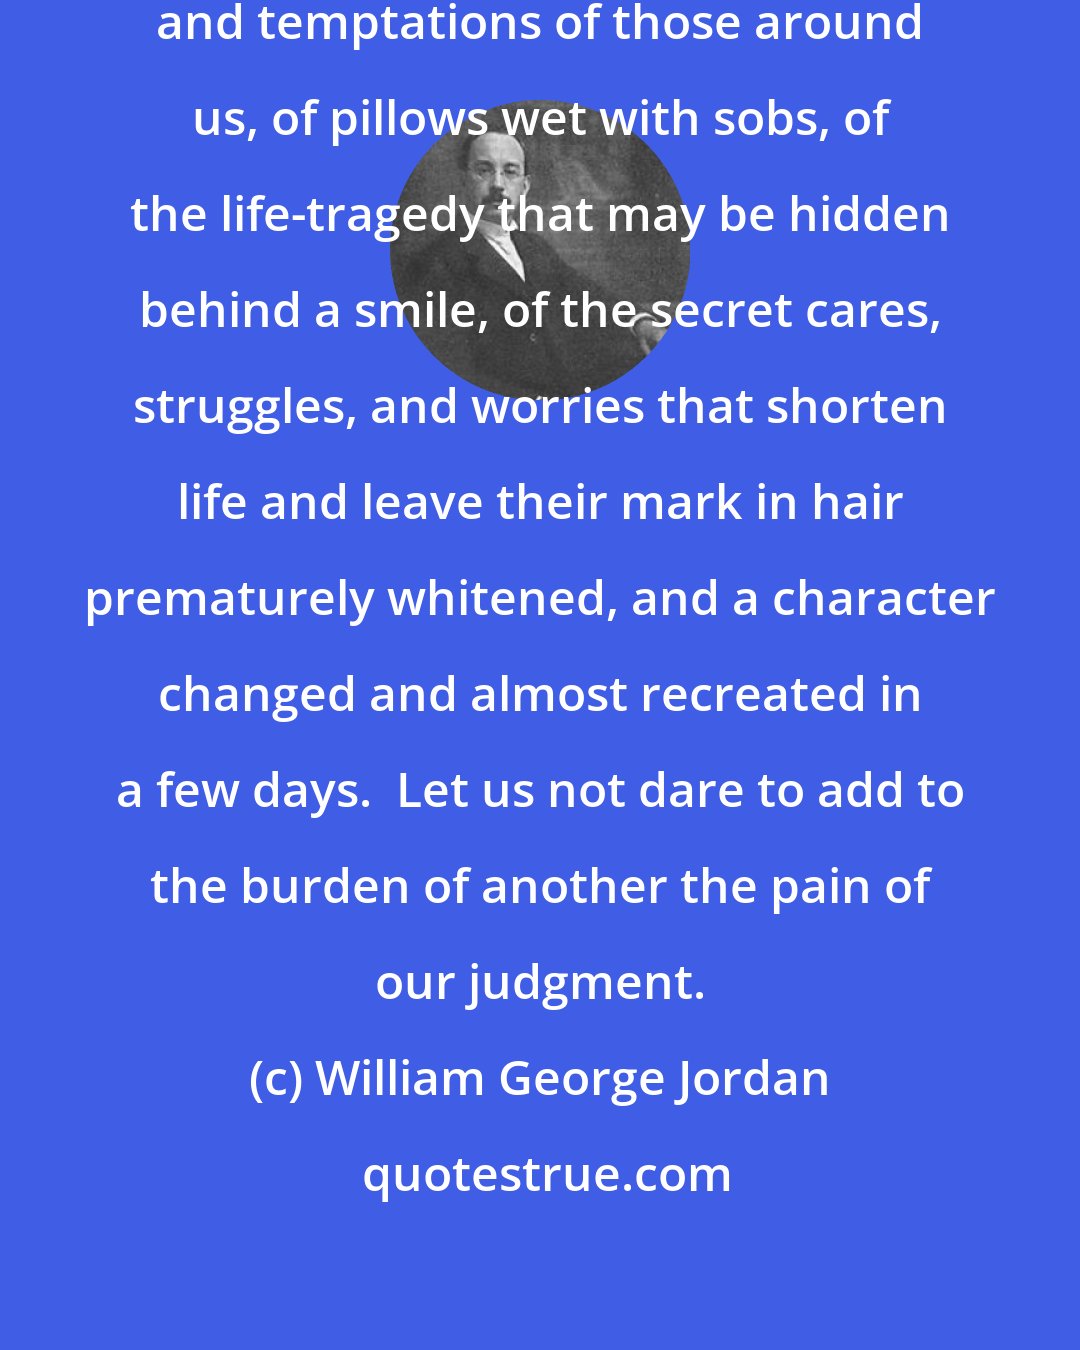 William George Jordan: We know nothing of the trials, sorrows and temptations of those around us, of pillows wet with sobs, of the life-tragedy that may be hidden behind a smile, of the secret cares, struggles, and worries that shorten life and leave their mark in hair prematurely whitened, and a character changed and almost recreated in a few days.  Let us not dare to add to the burden of another the pain of our judgment.